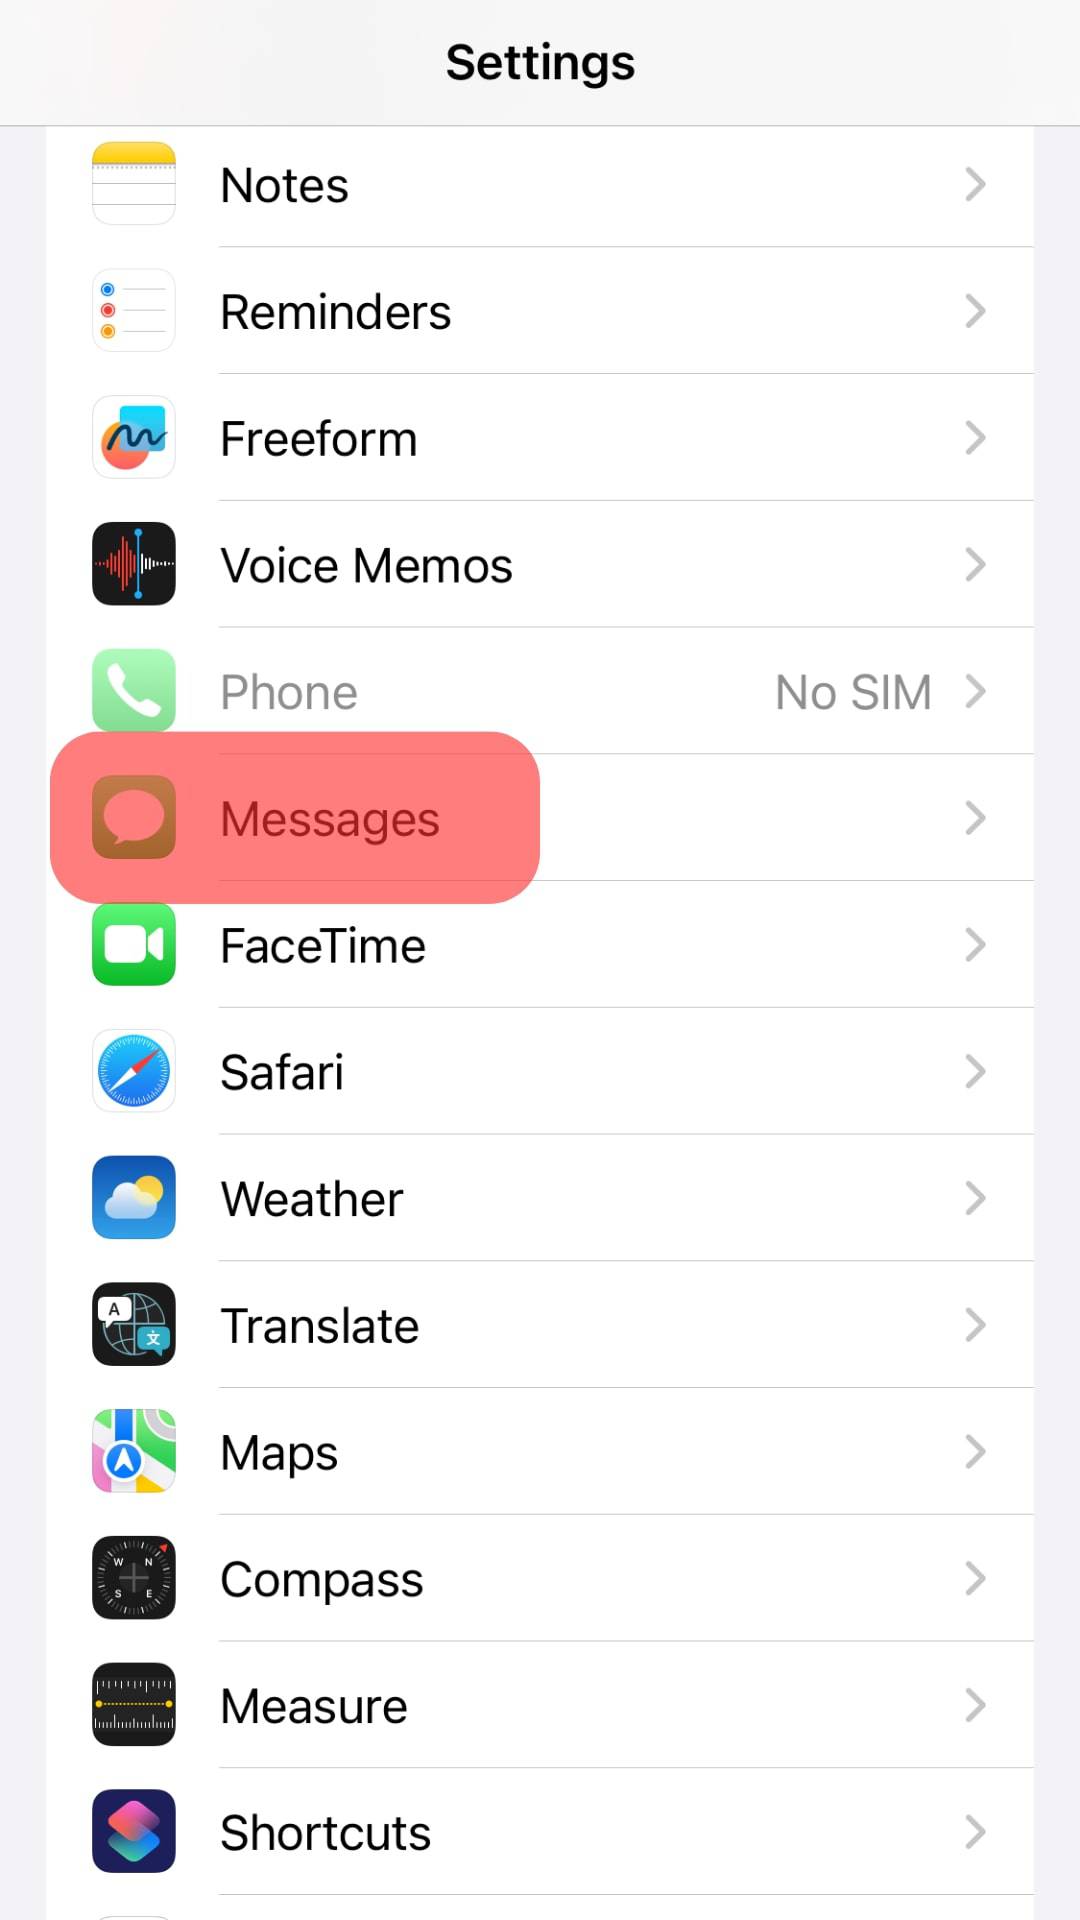 Select Messages.